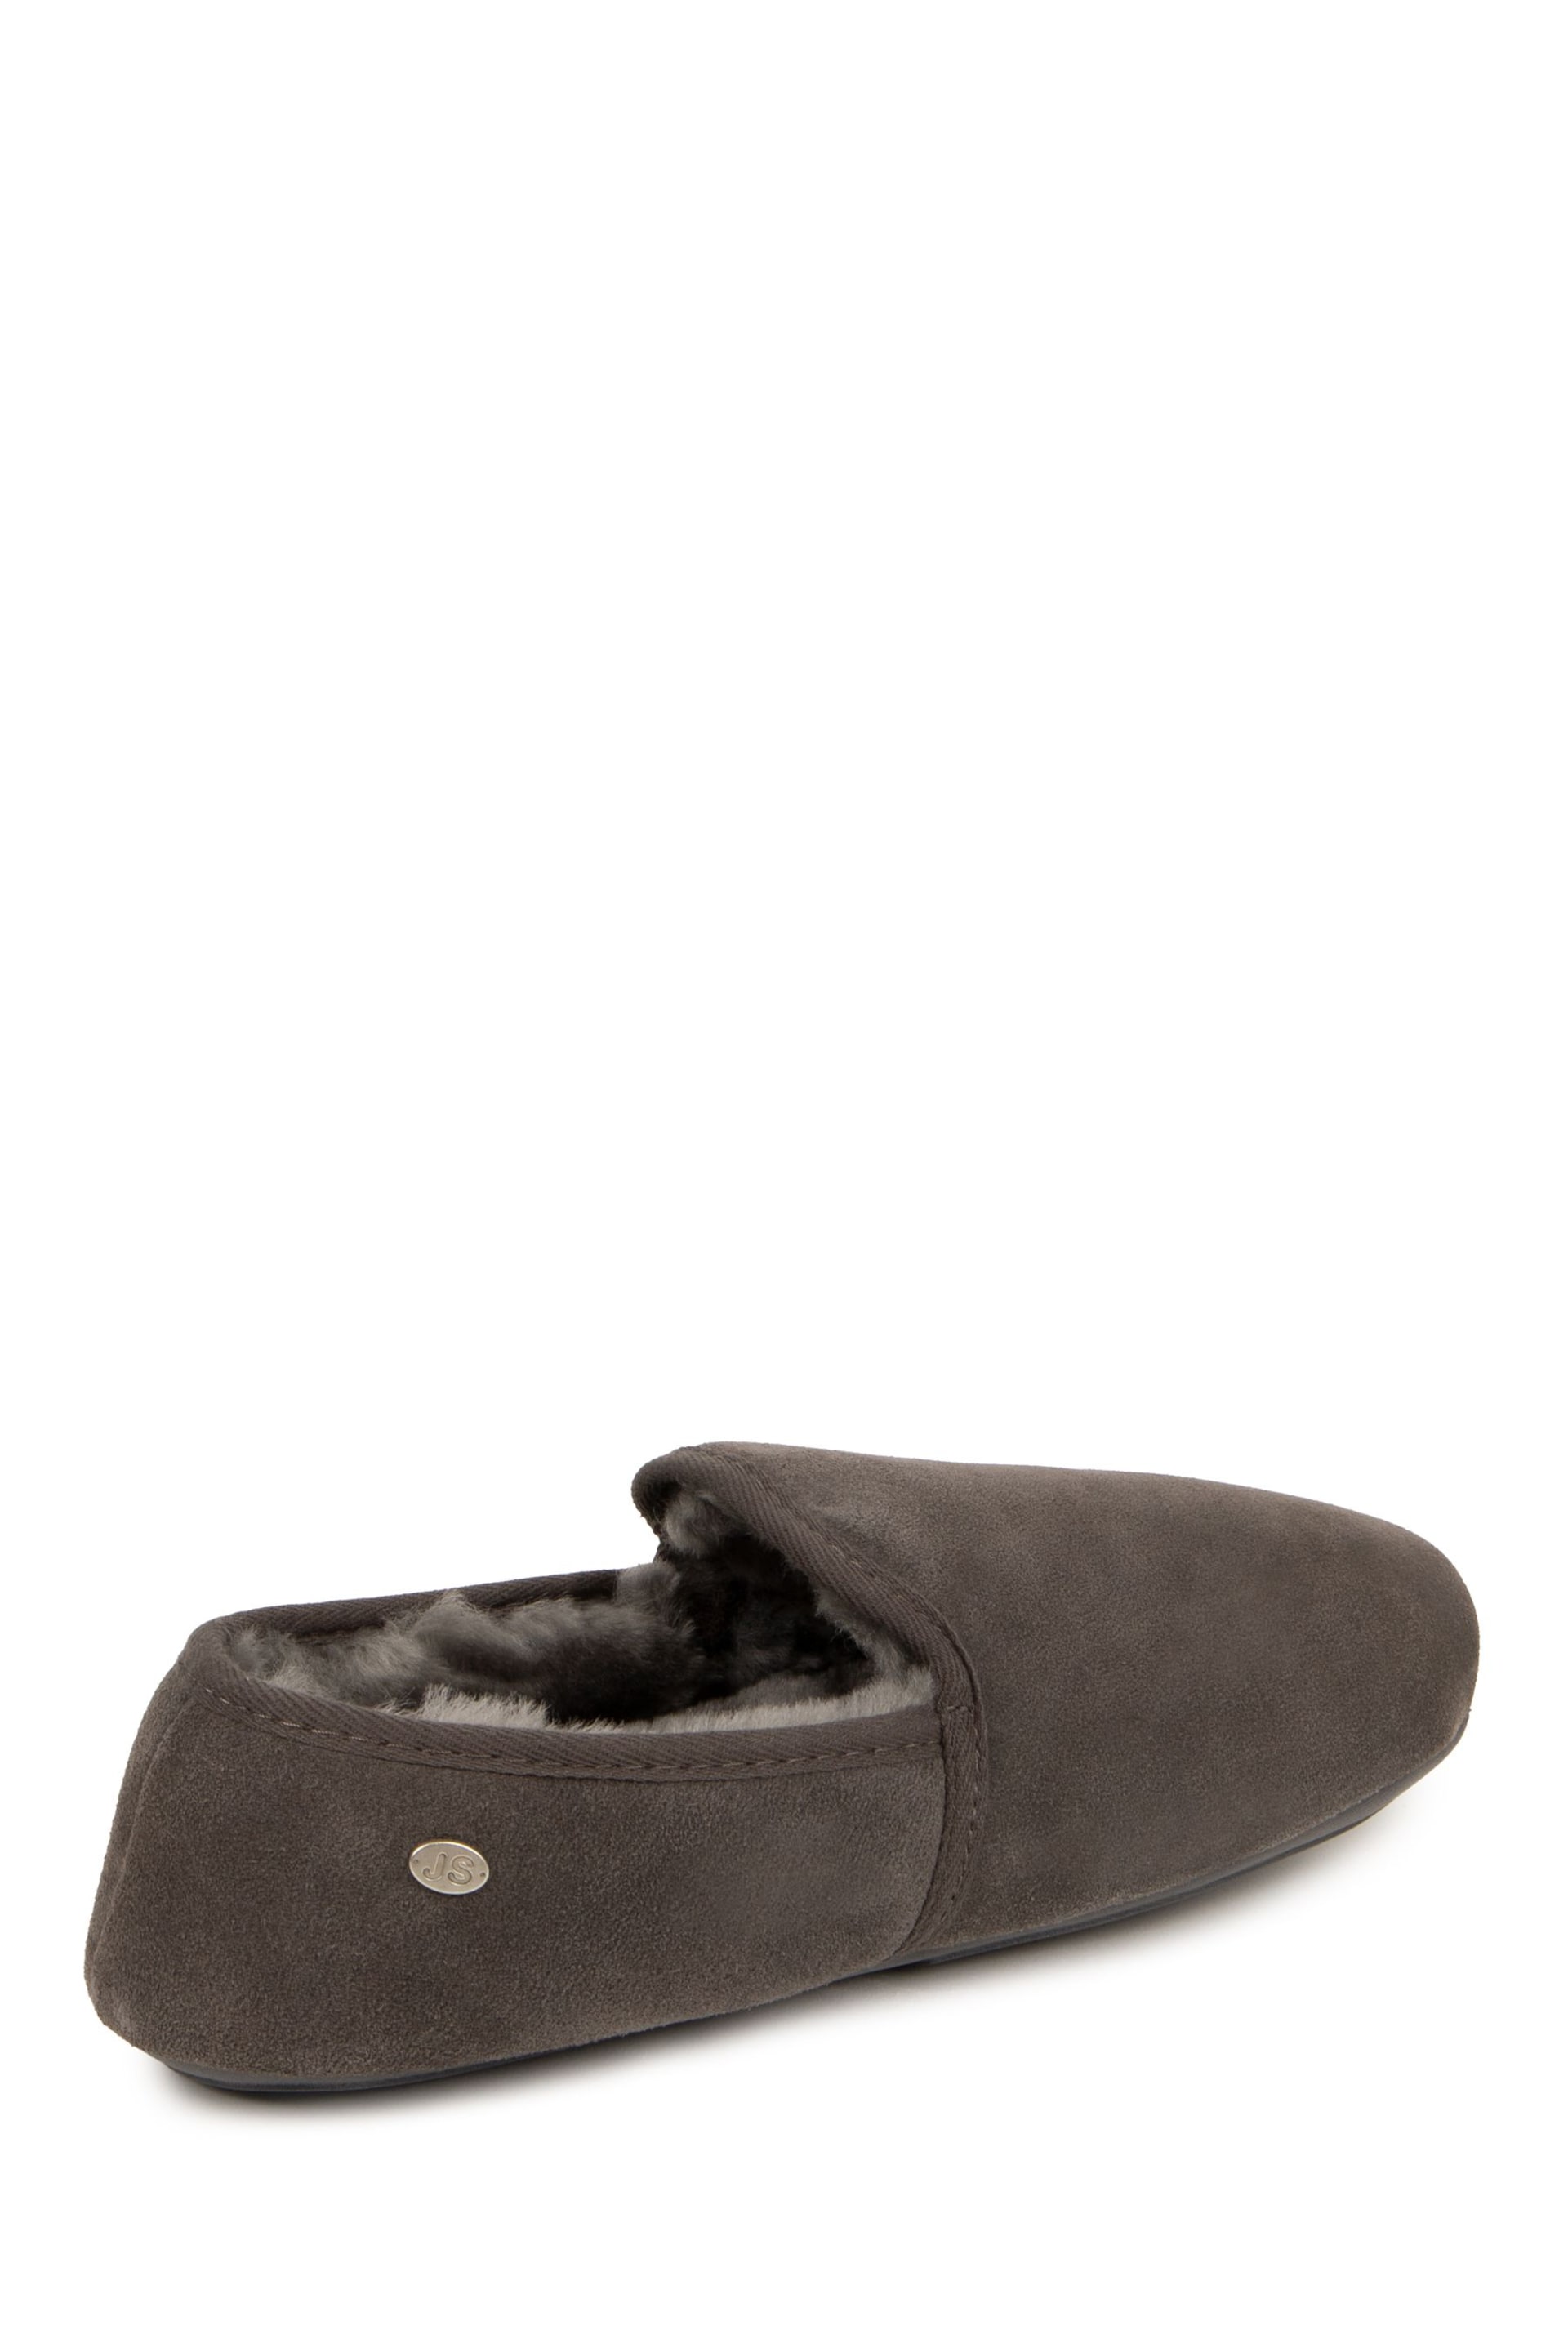 Just Sheepskin Grey Mens Chester Slippers - Image 4 of 5